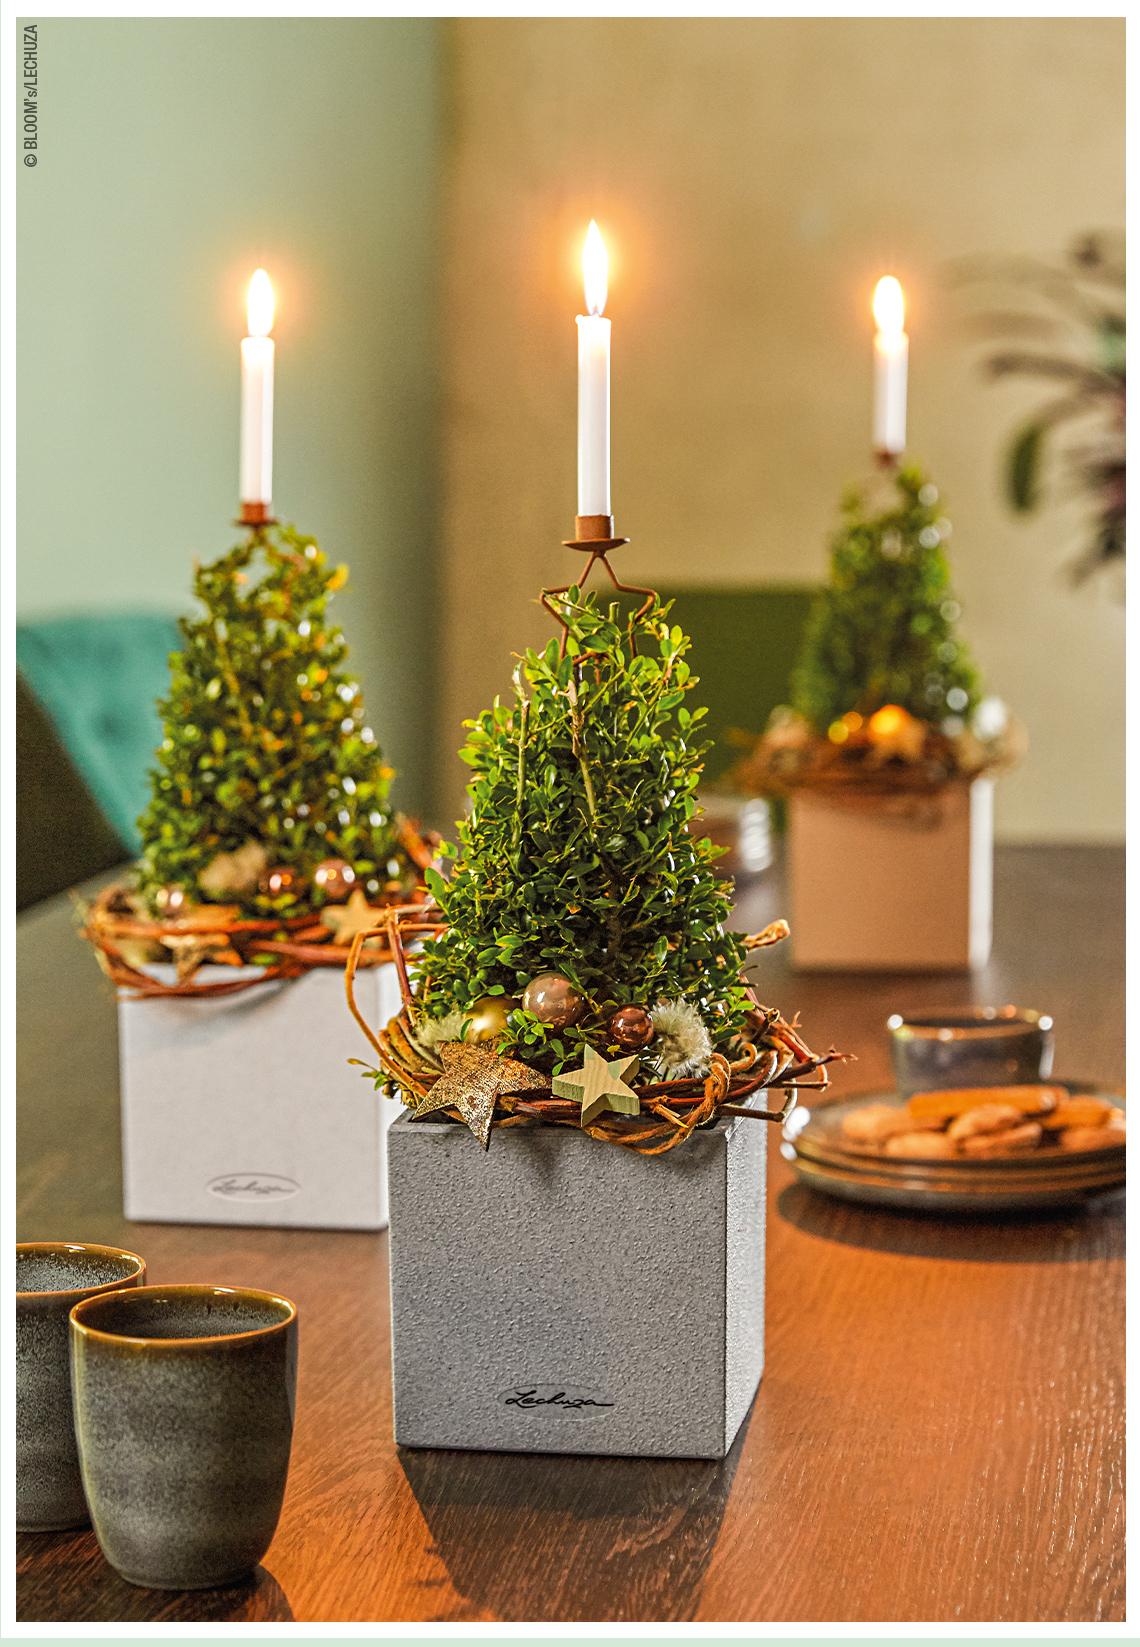 Advent decoration in CANTO Stone 14 with candle and fir tree